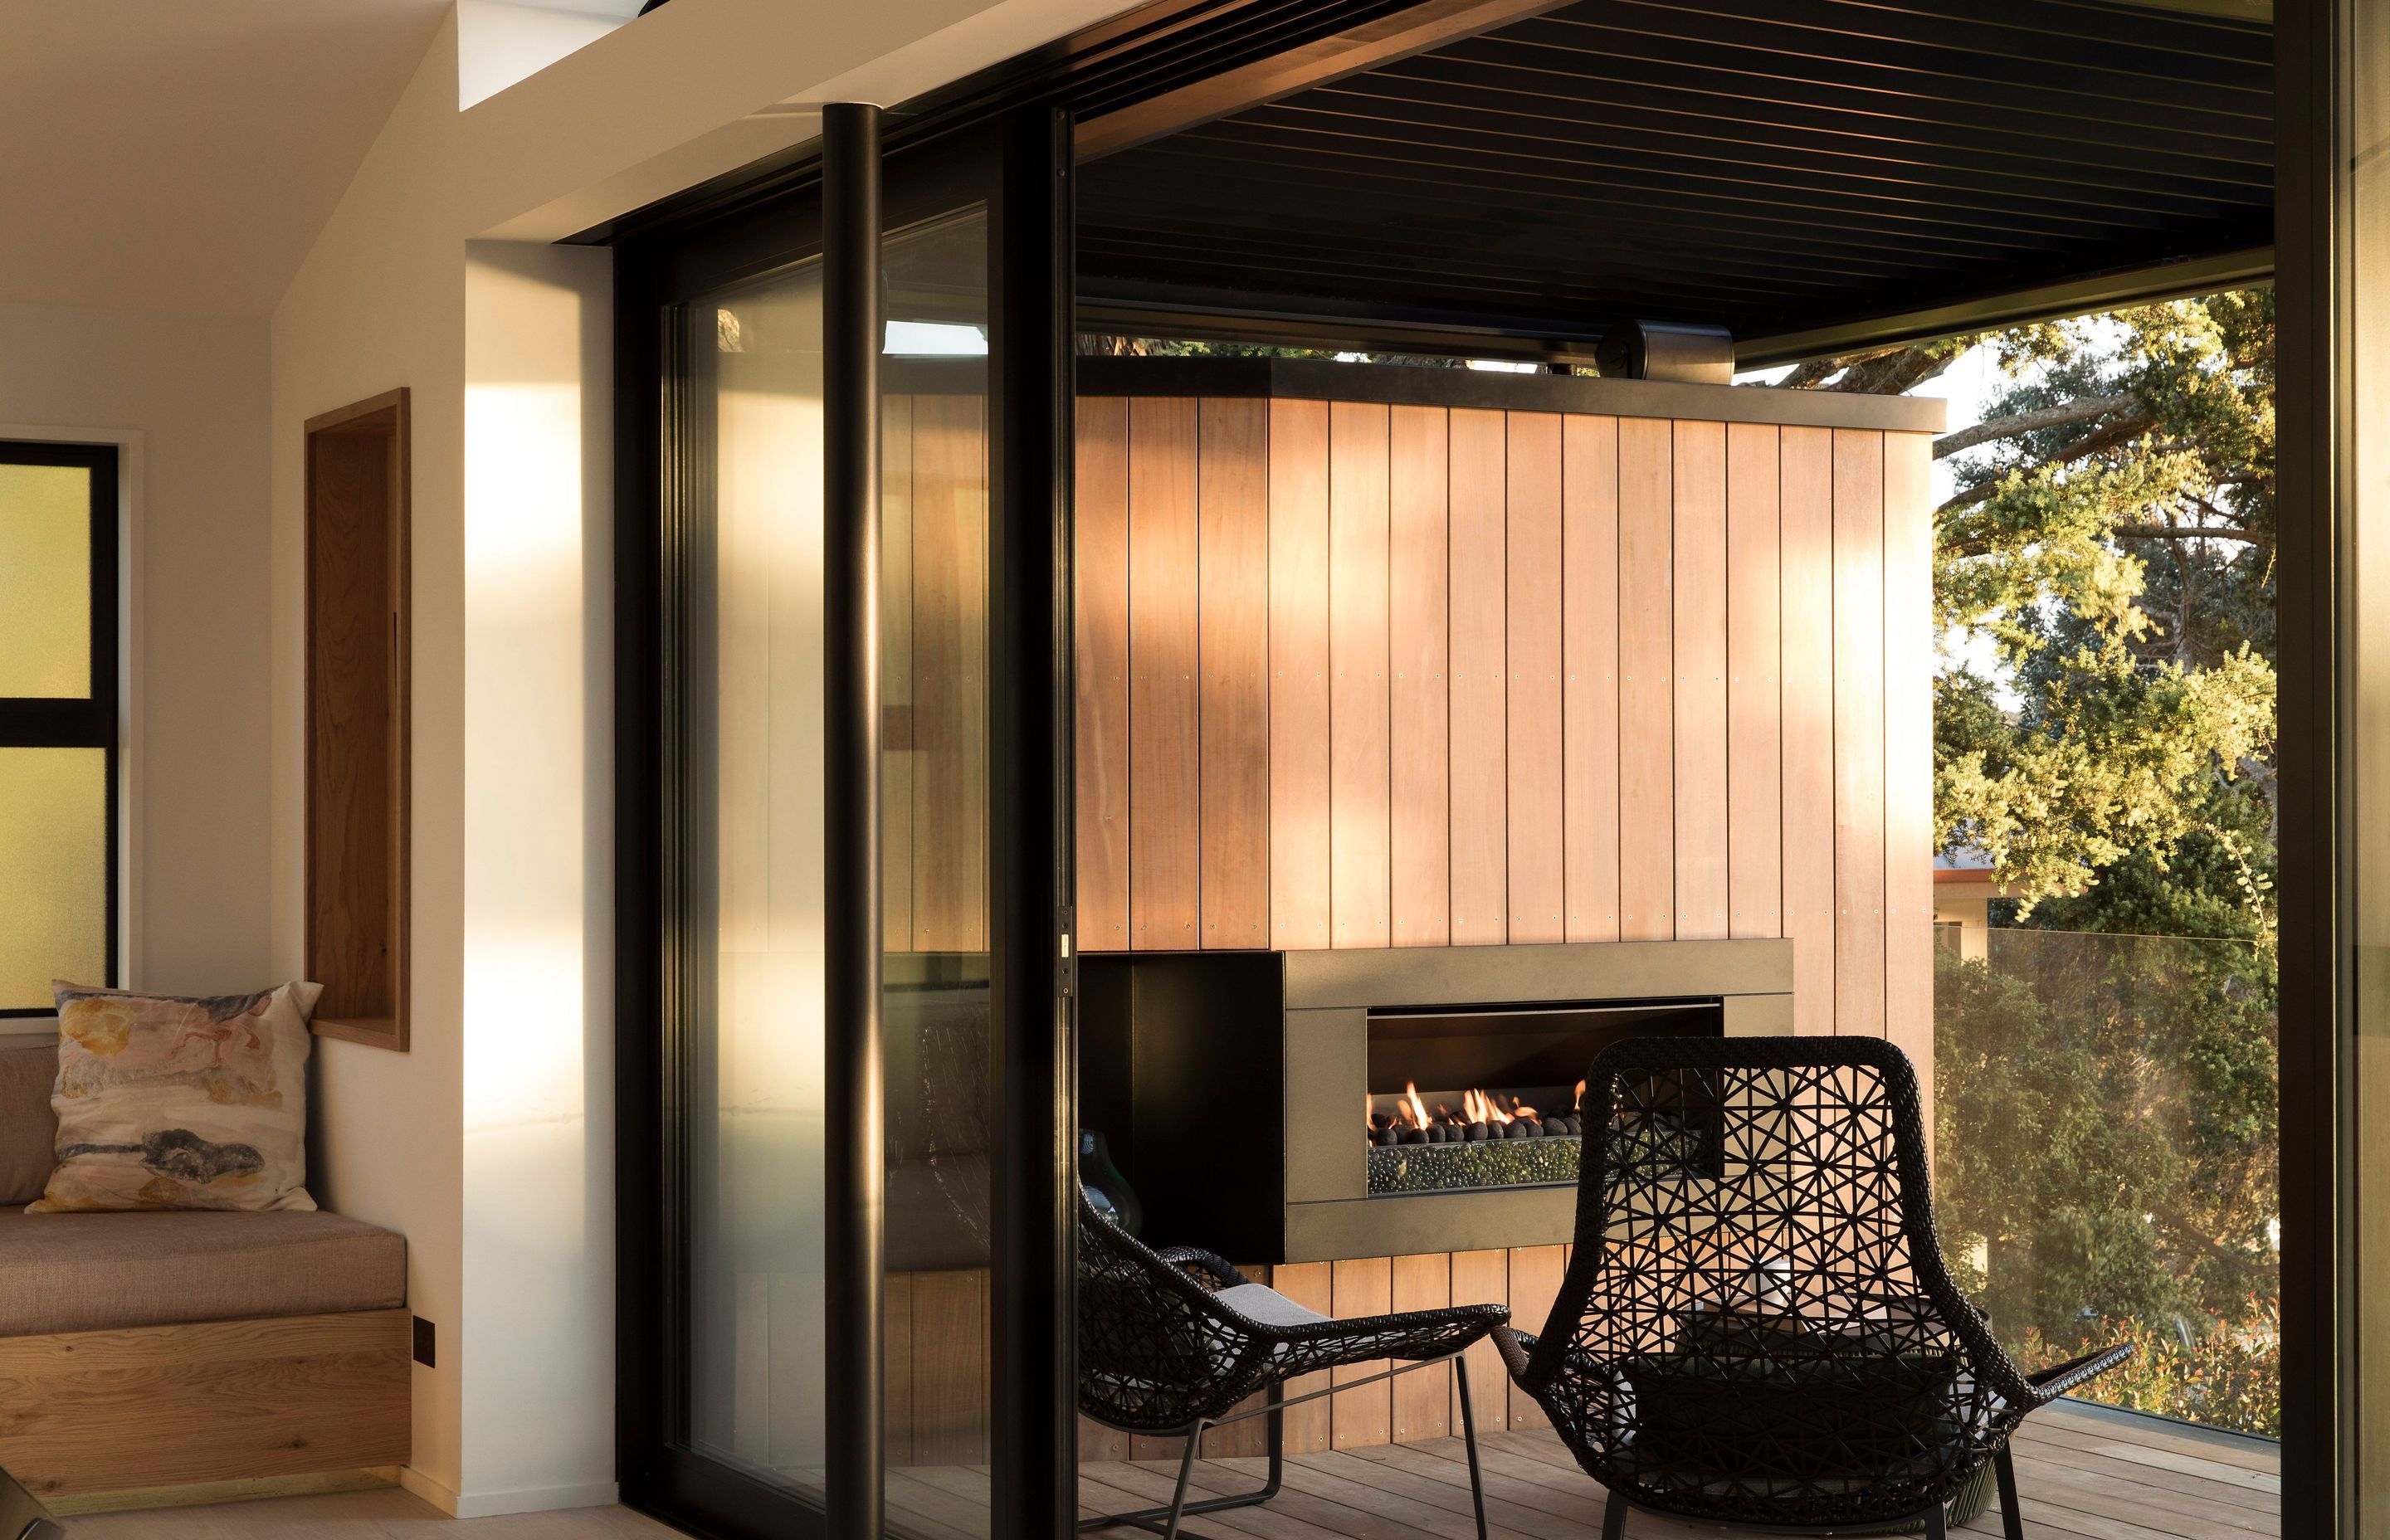 The covered terrace from the dining area features an in-built outdoor gas fire and louvres to control the shade.